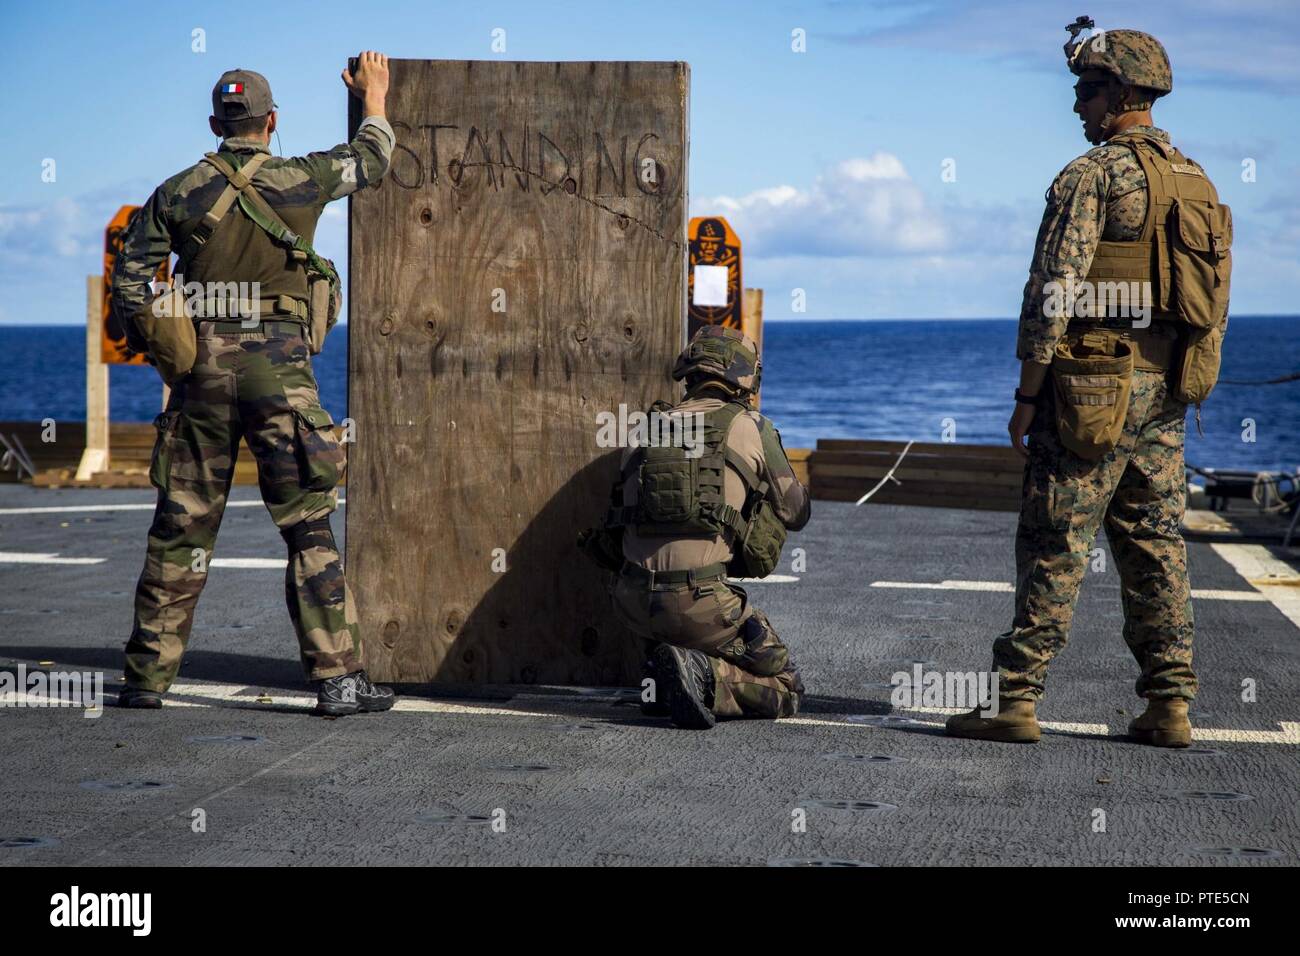 U.S. Marine Corps Sgt. Joseph Pritchard, right, an infantryman with Task Force Koa Moana 17, supervises a French soldier shoot at a target during a live fire range drill aboard the USNS Sacagawea, July 13, 2017. Koa Moana 17 is designed to improve interoperability with our partners, enhance military-to-military relations, and expose the Marine Corps forces to different types of terrain for familiarity in the event of a natural disaster in the region. Stock Photo